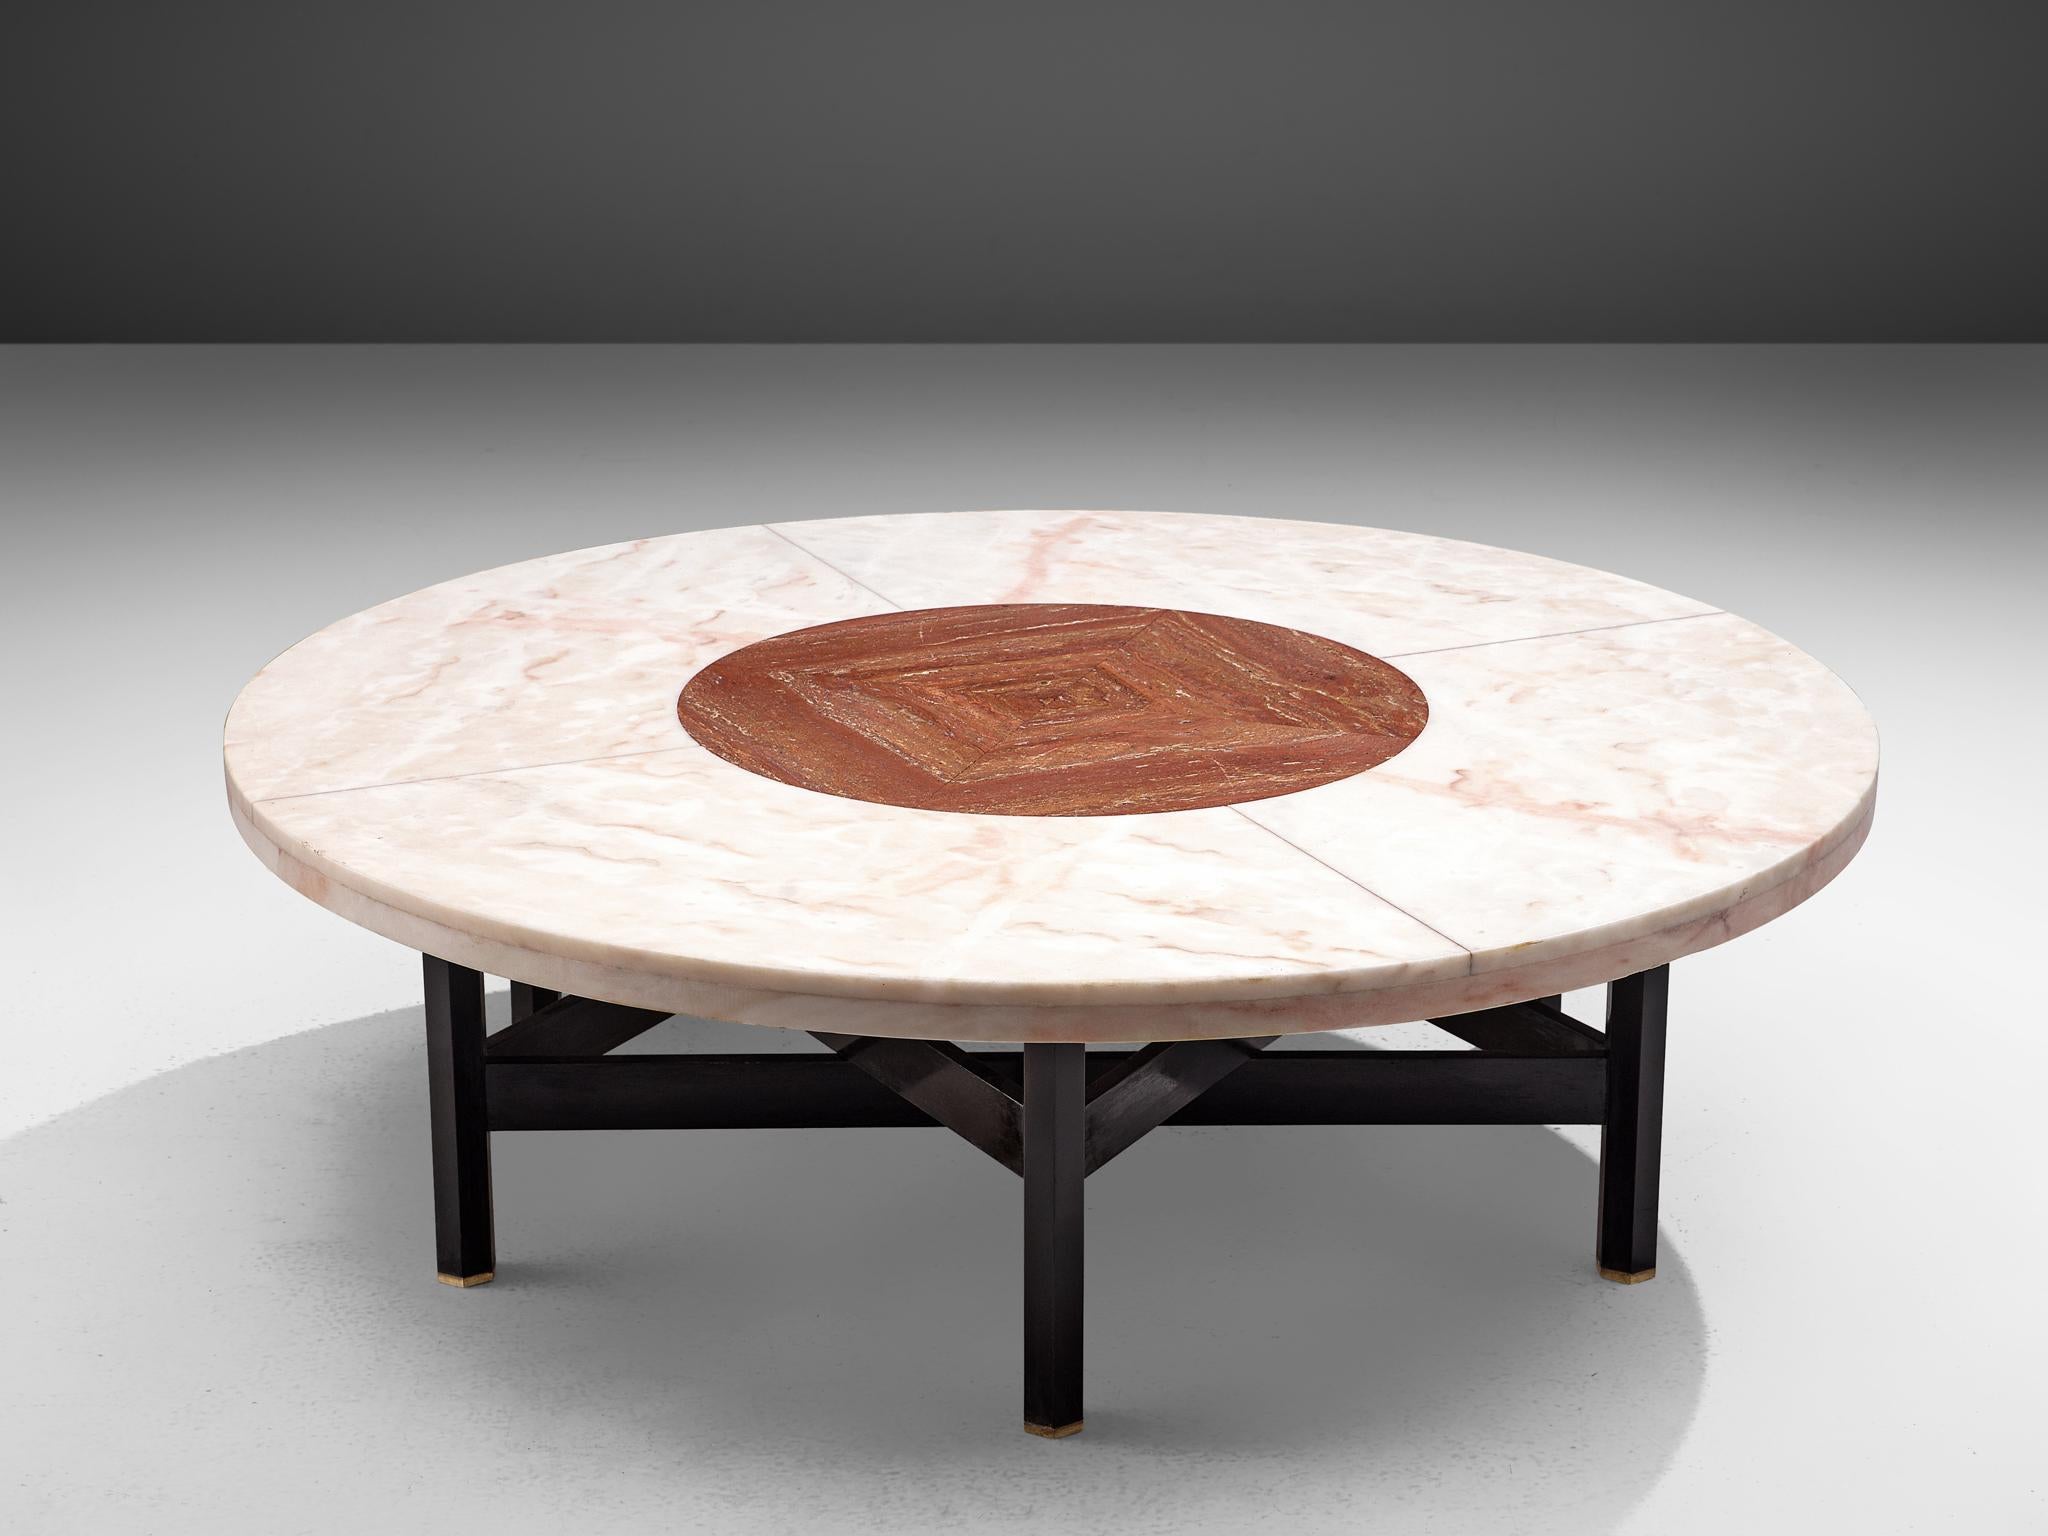 Jan Vlug, cocktail table, wood, marble, travertine and brass, Belgium, 1970s.

Exclusive coffee table with characteristic graphical base and round stone top. The base, made of dark lacquered wood, consists of six legs, formed into a star-shape. Two